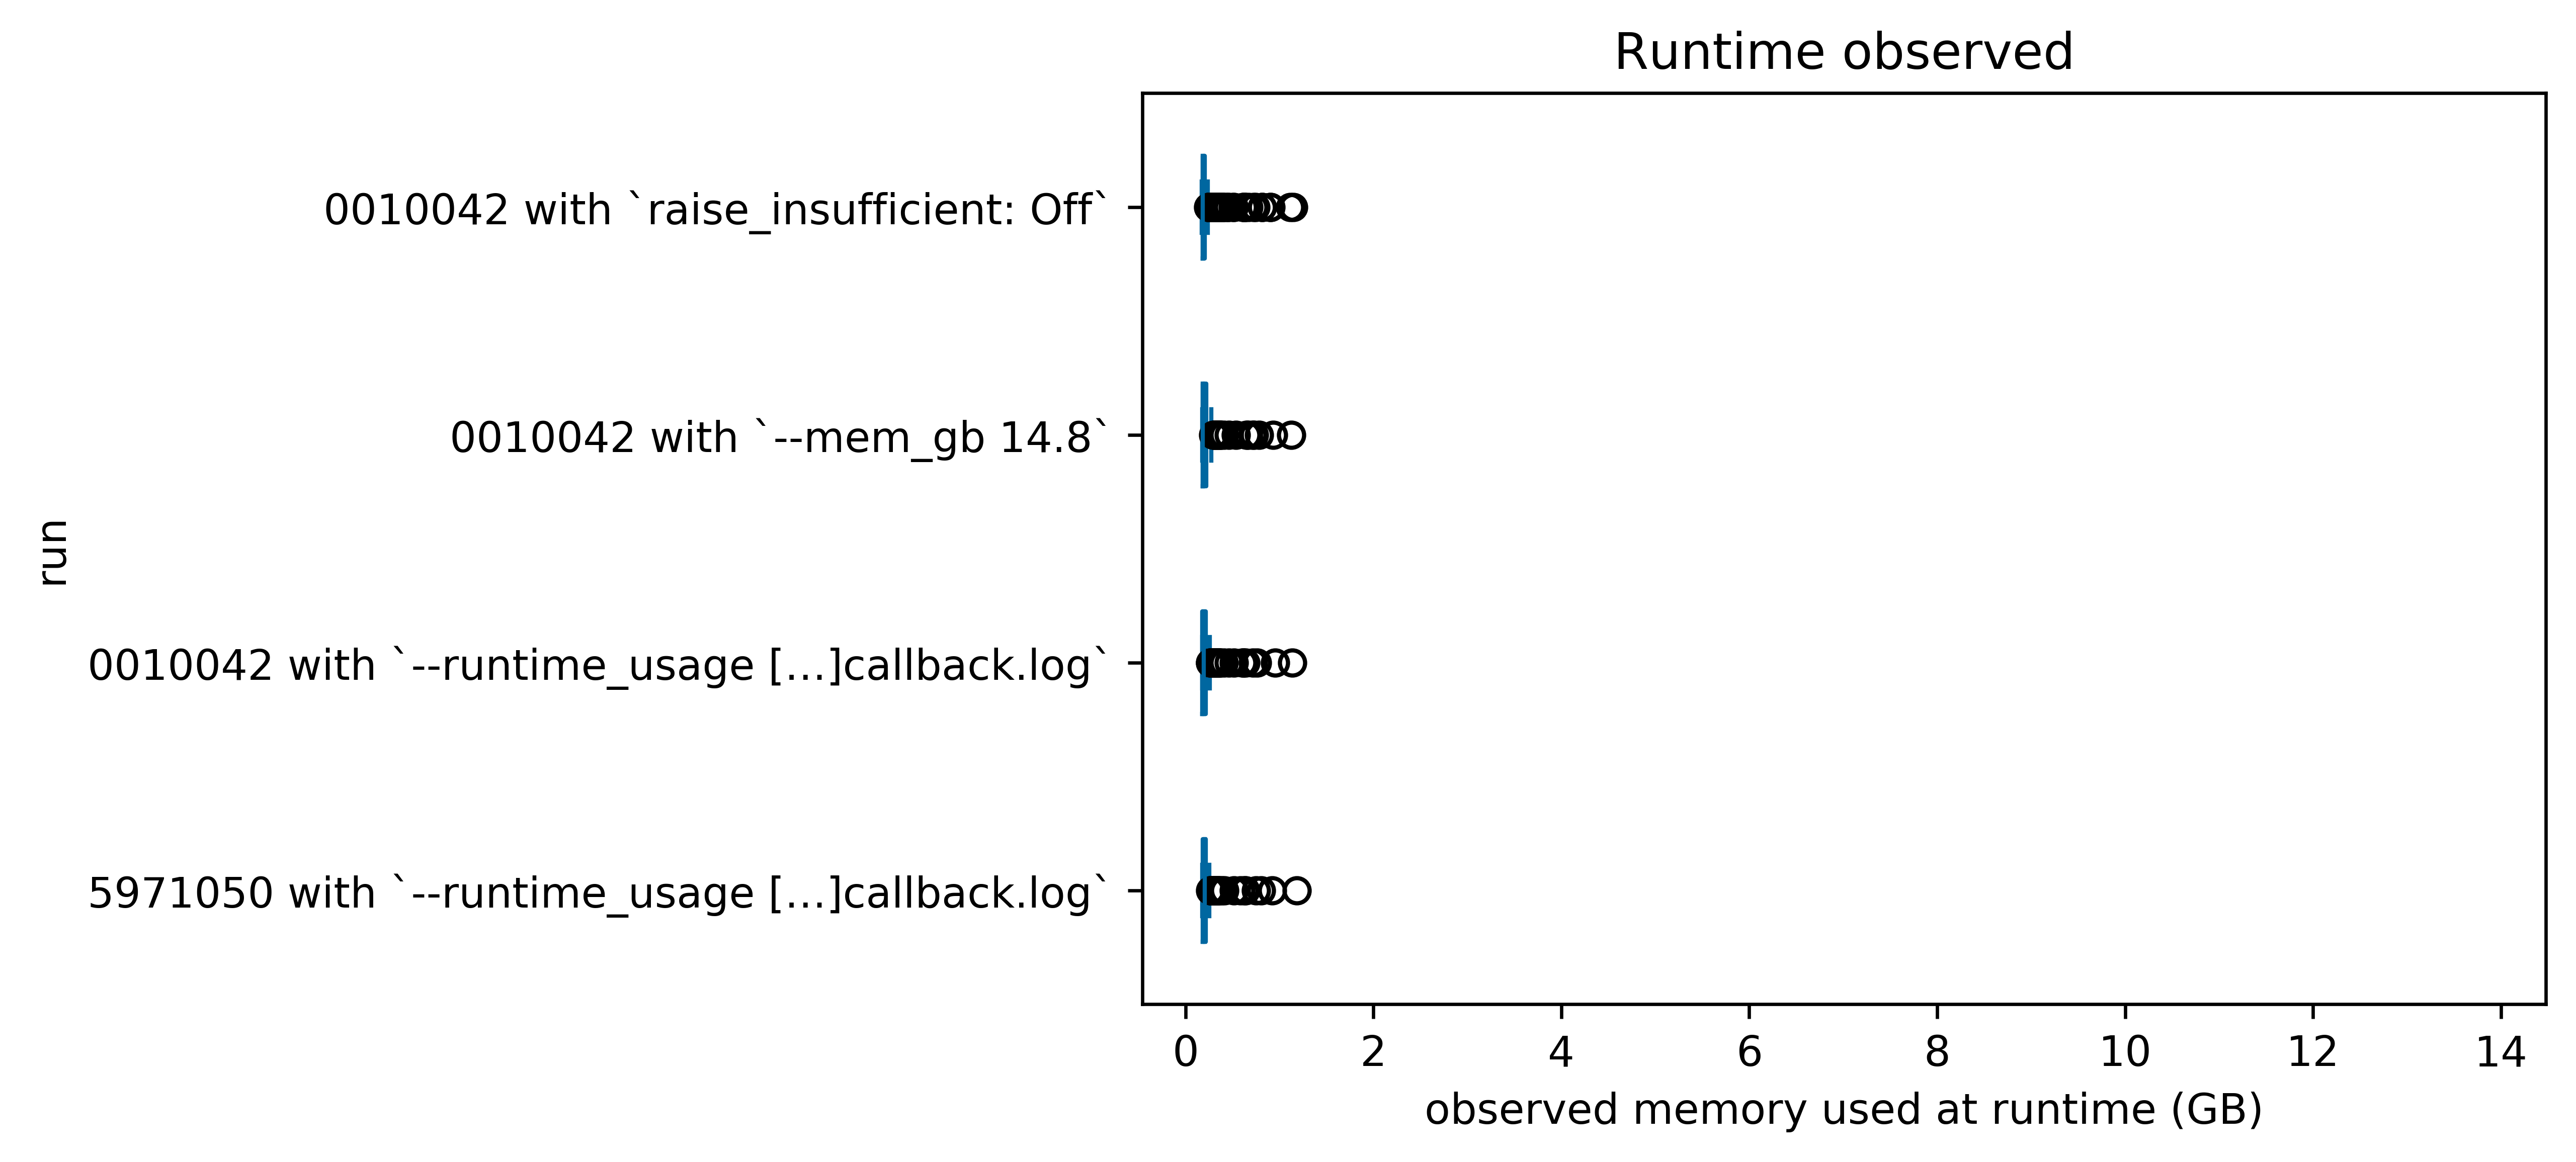 Box-and-whisker plot of observed memory usage